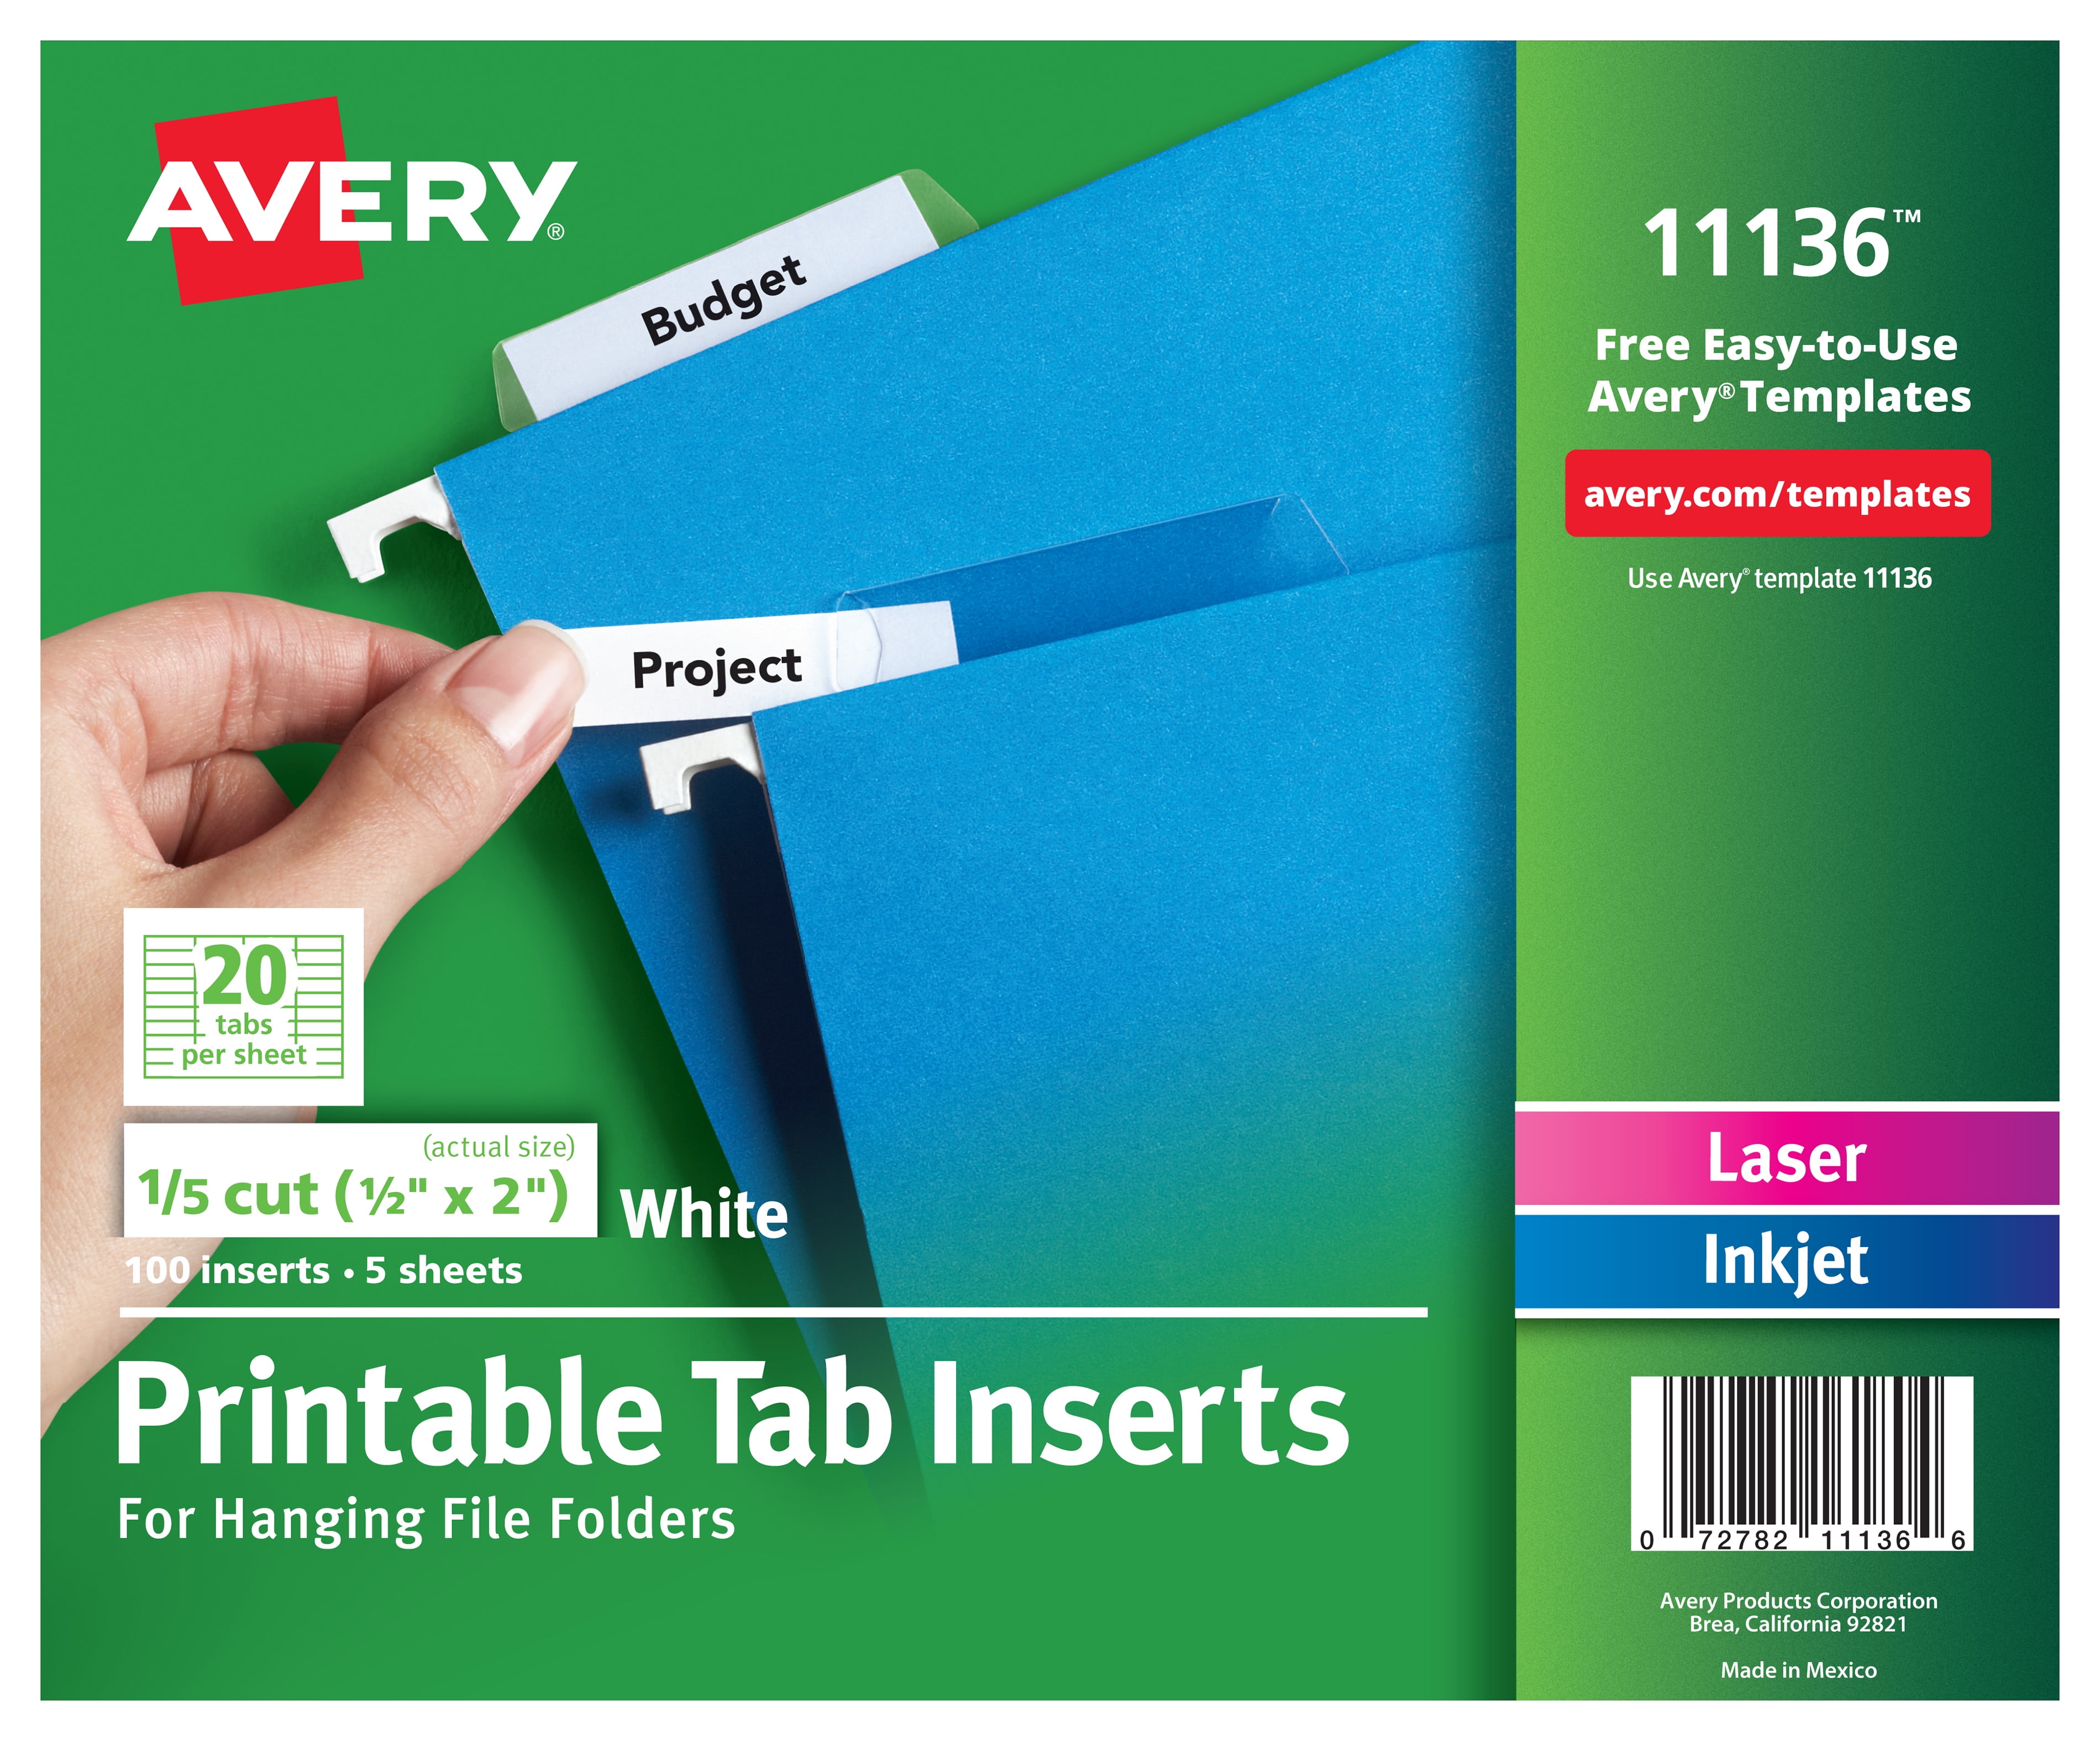 Avery Printable Tab Inserts for Hanging File Folders, 21/21" Cut, 221 Pack For Pendaflex Label Template